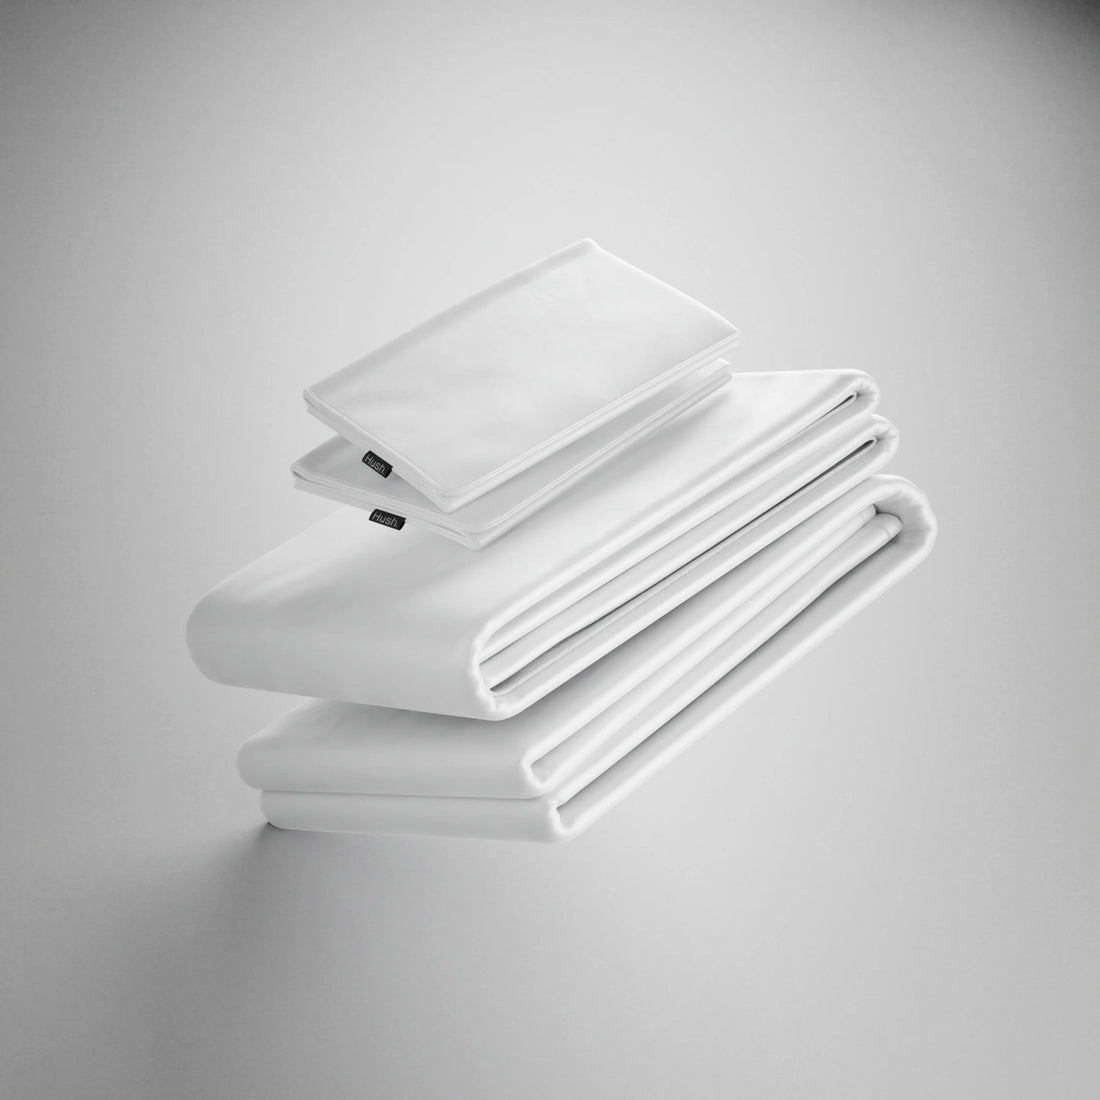 Hush Iced 2.0 Cooling Sheets in white color